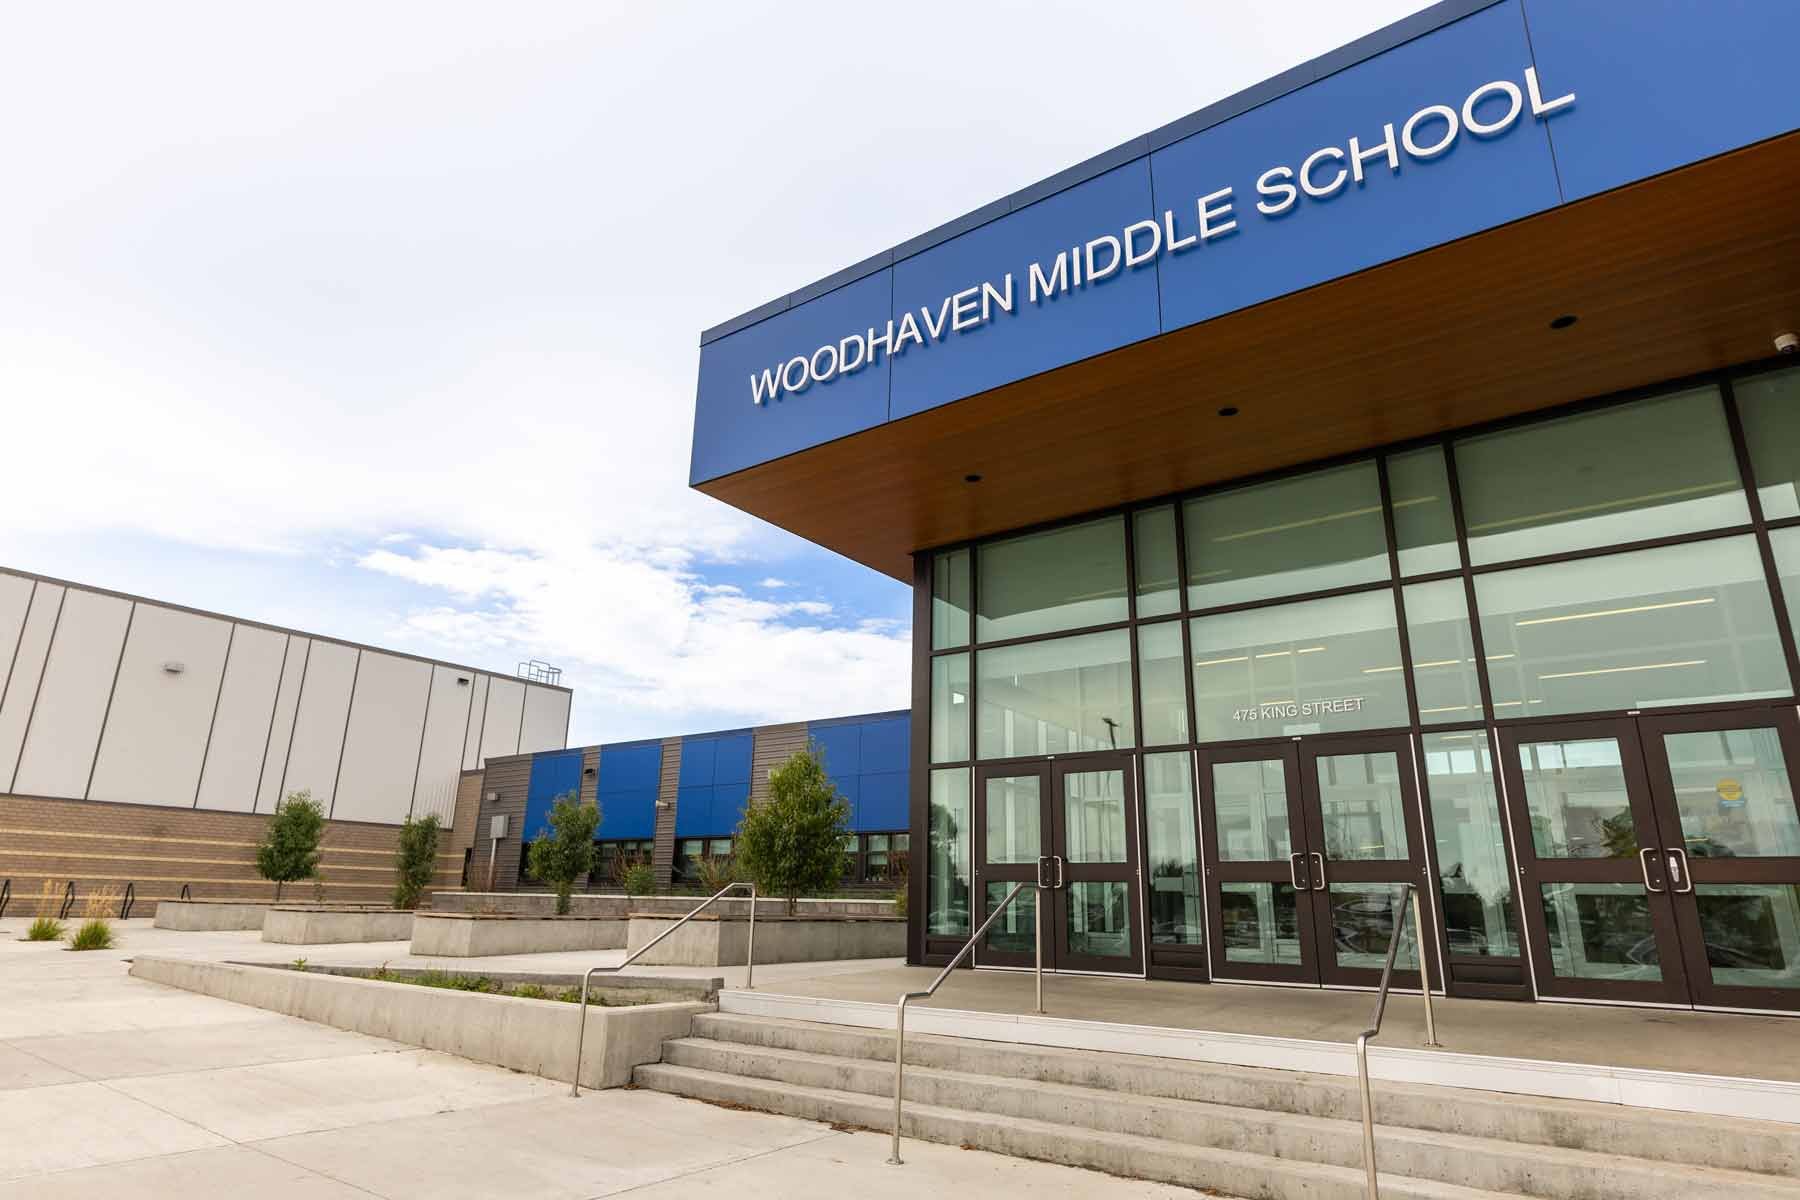 Woodhaven Middle School